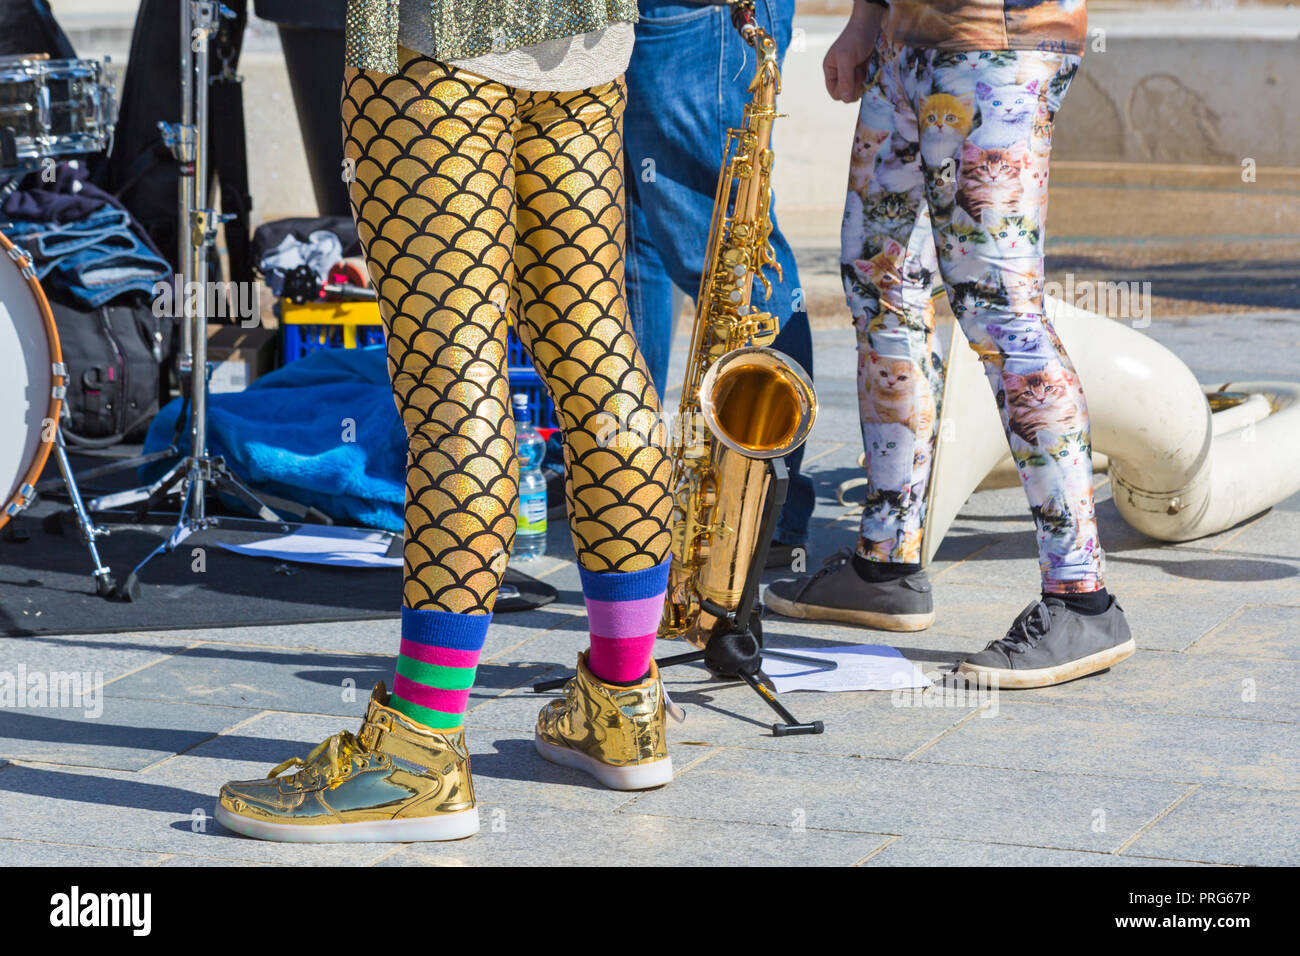 Musician's leggings - members of Tuba Libres group wearing gold leggings and boots & cat leggings at Bournemouth Arts by the Sea Festival Stock Photo